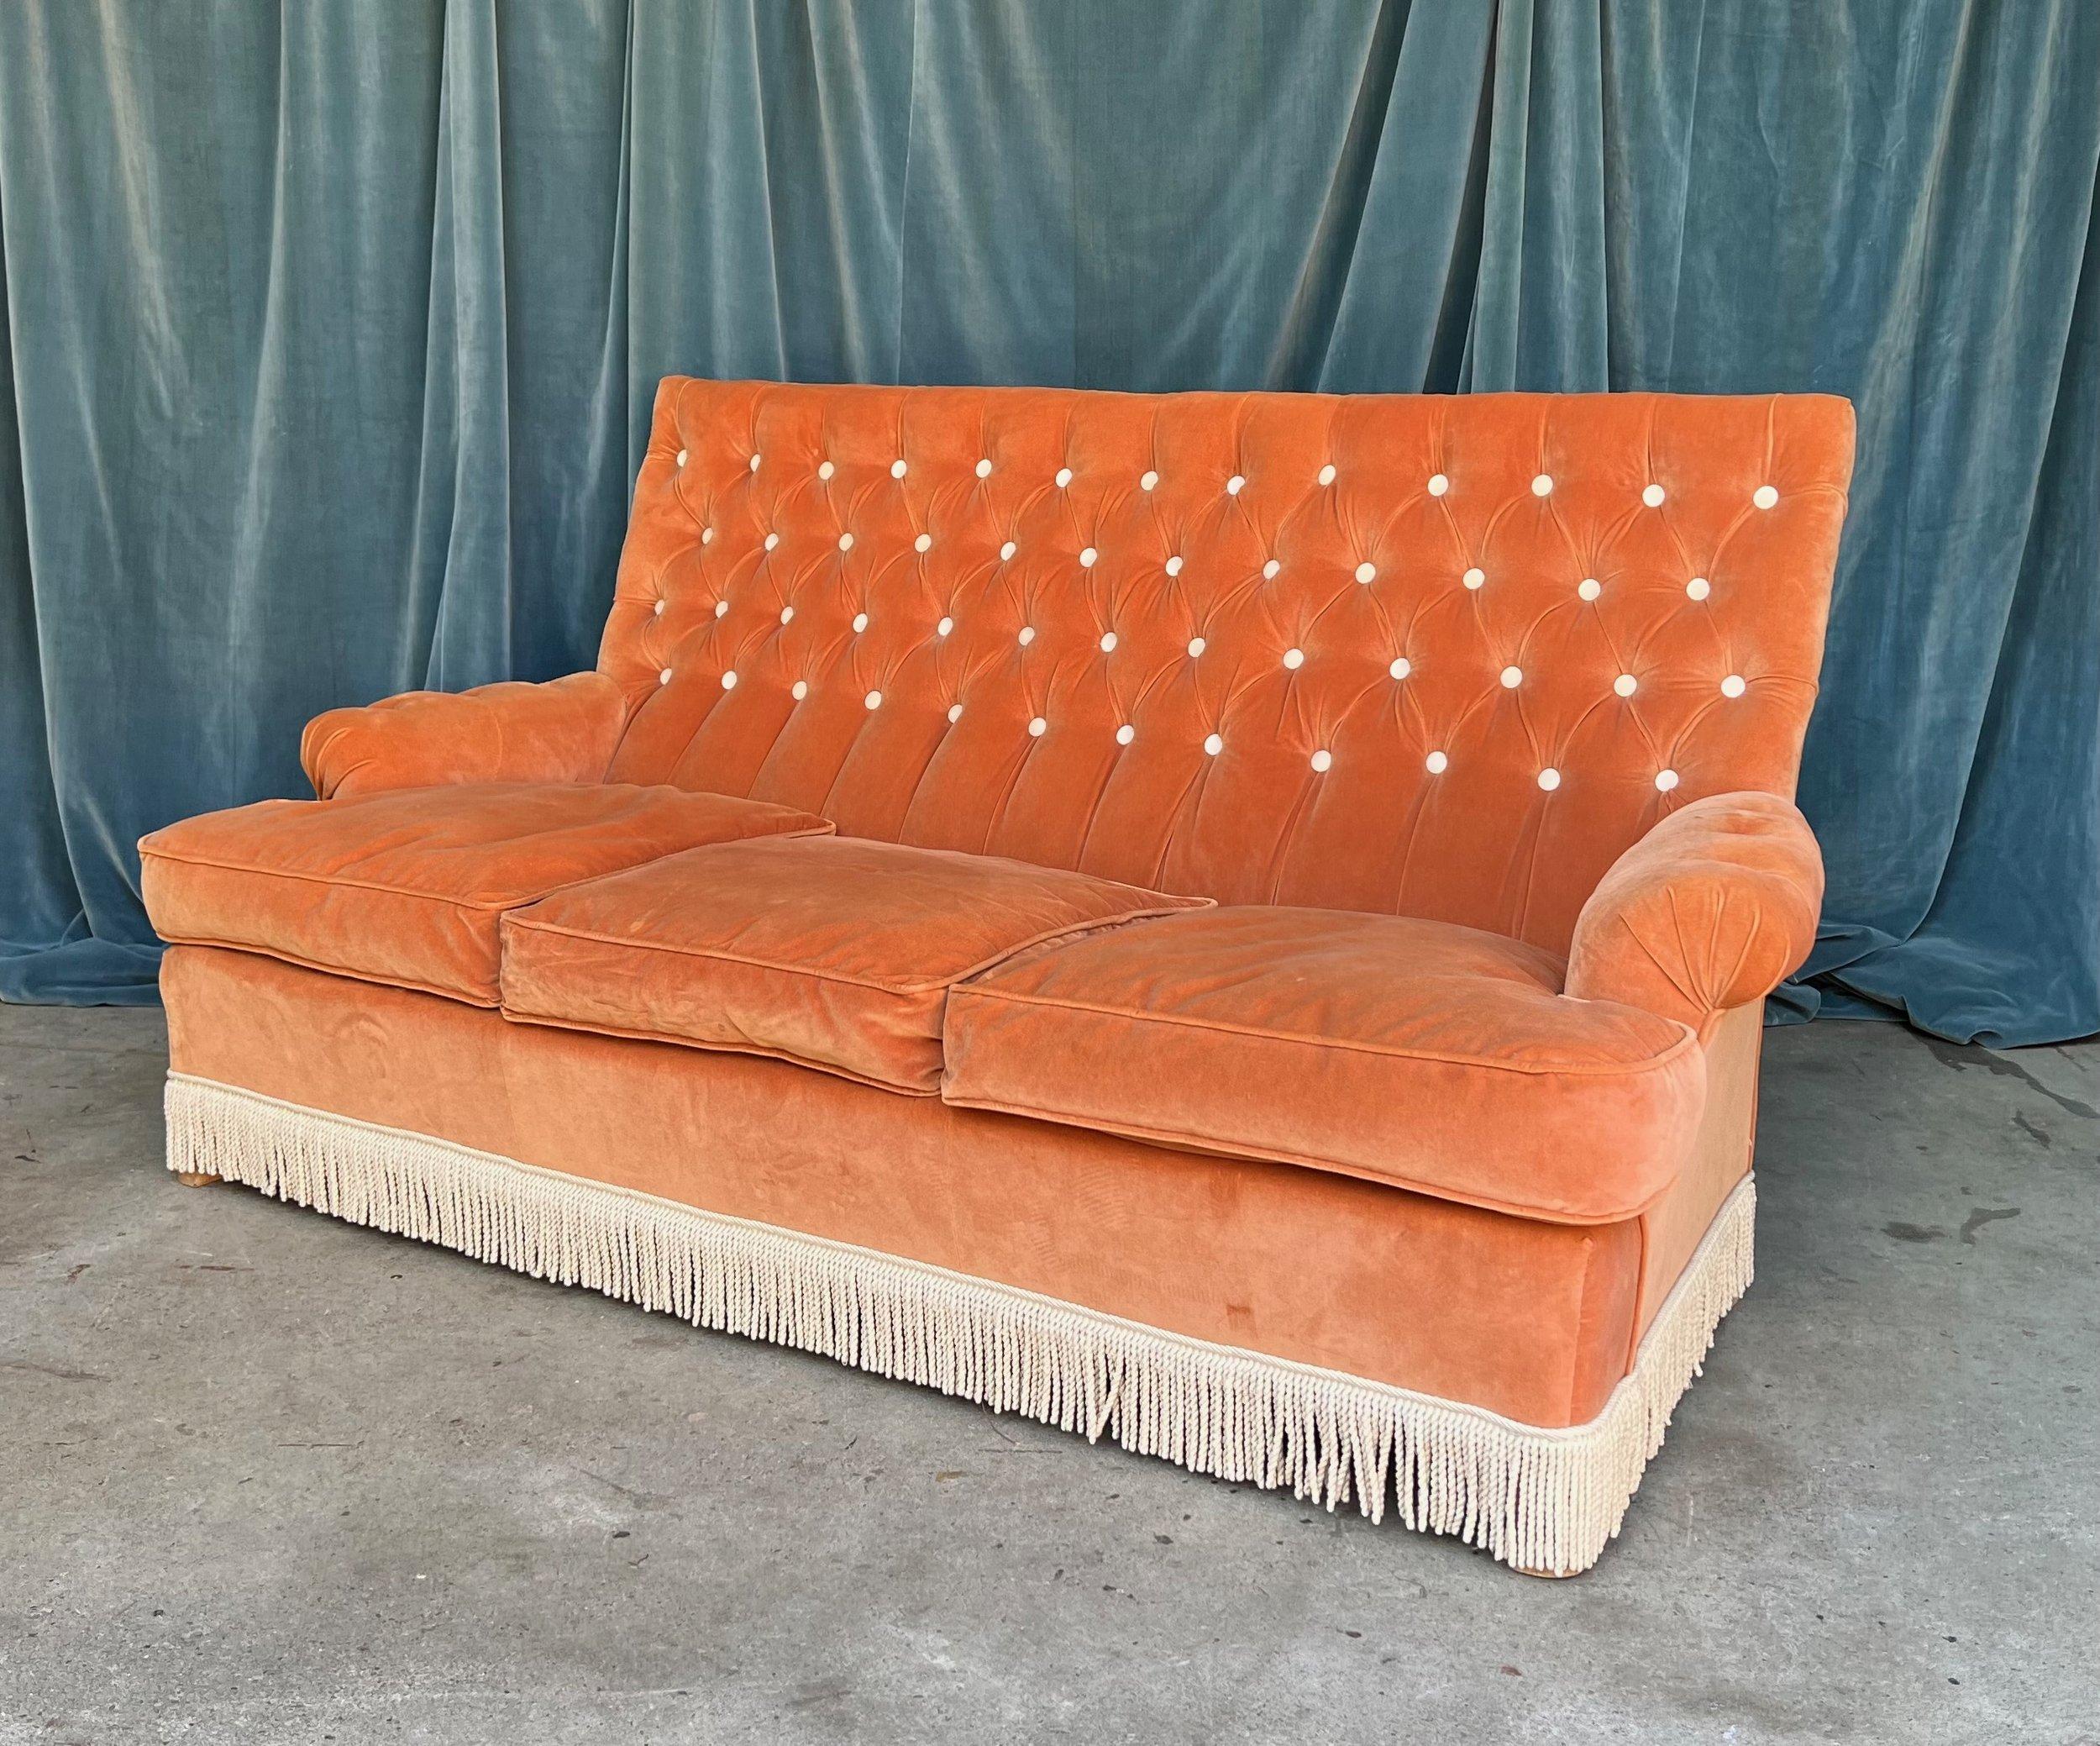 French Napoleon III Sofa in Pale Orange Velvet and White Fringe In Good Condition For Sale In Buchanan, NY